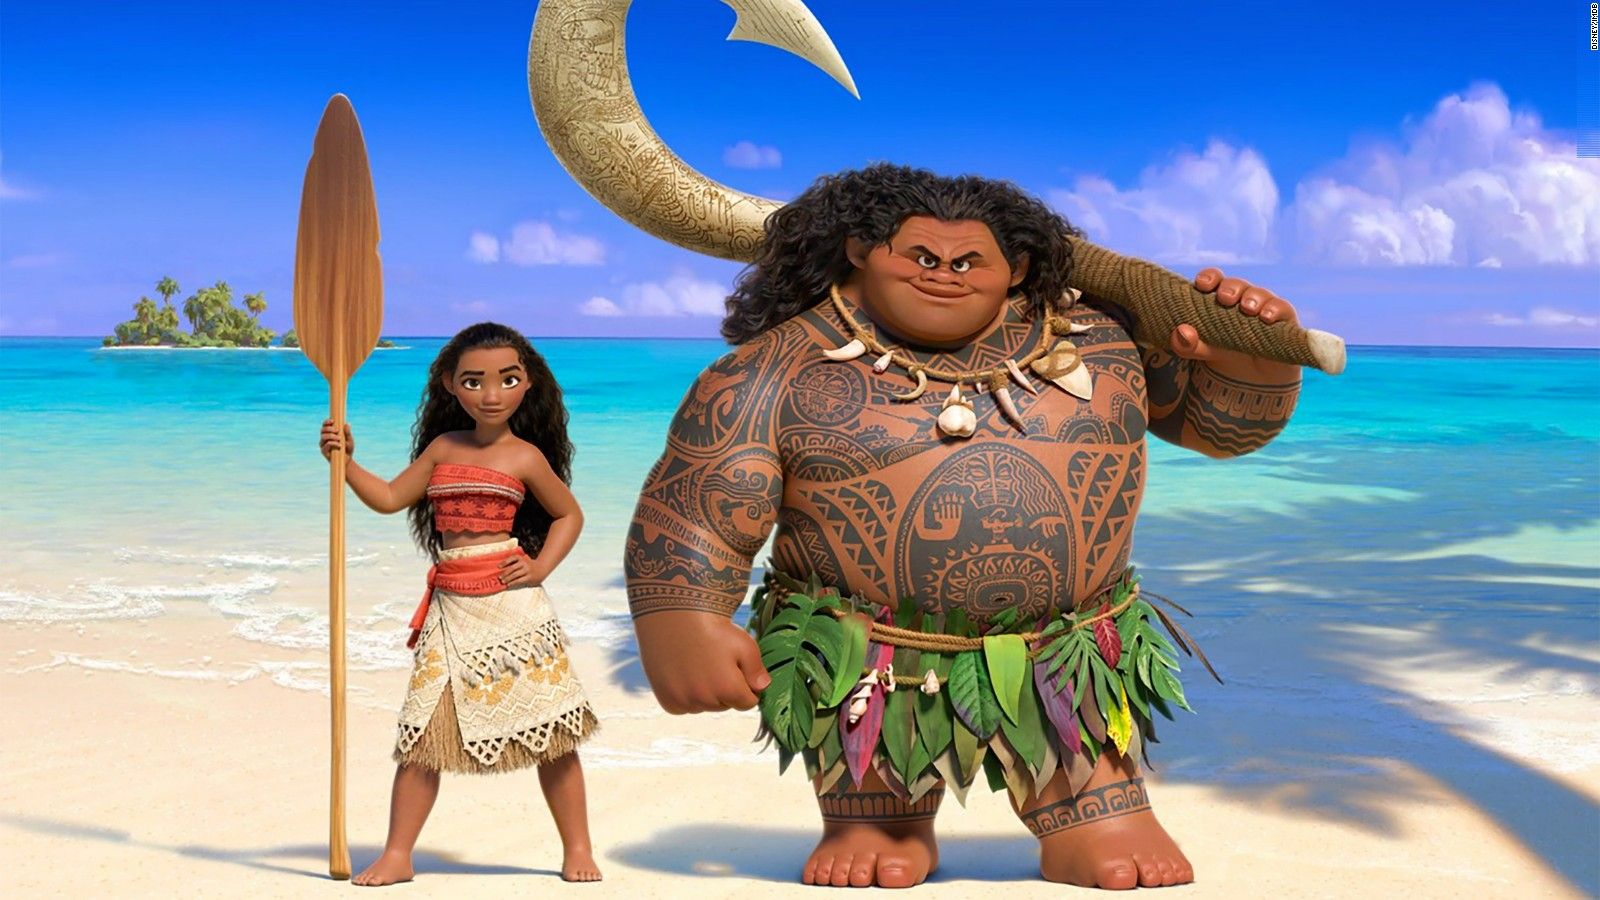 What 'Moana' gets right (Opinion)